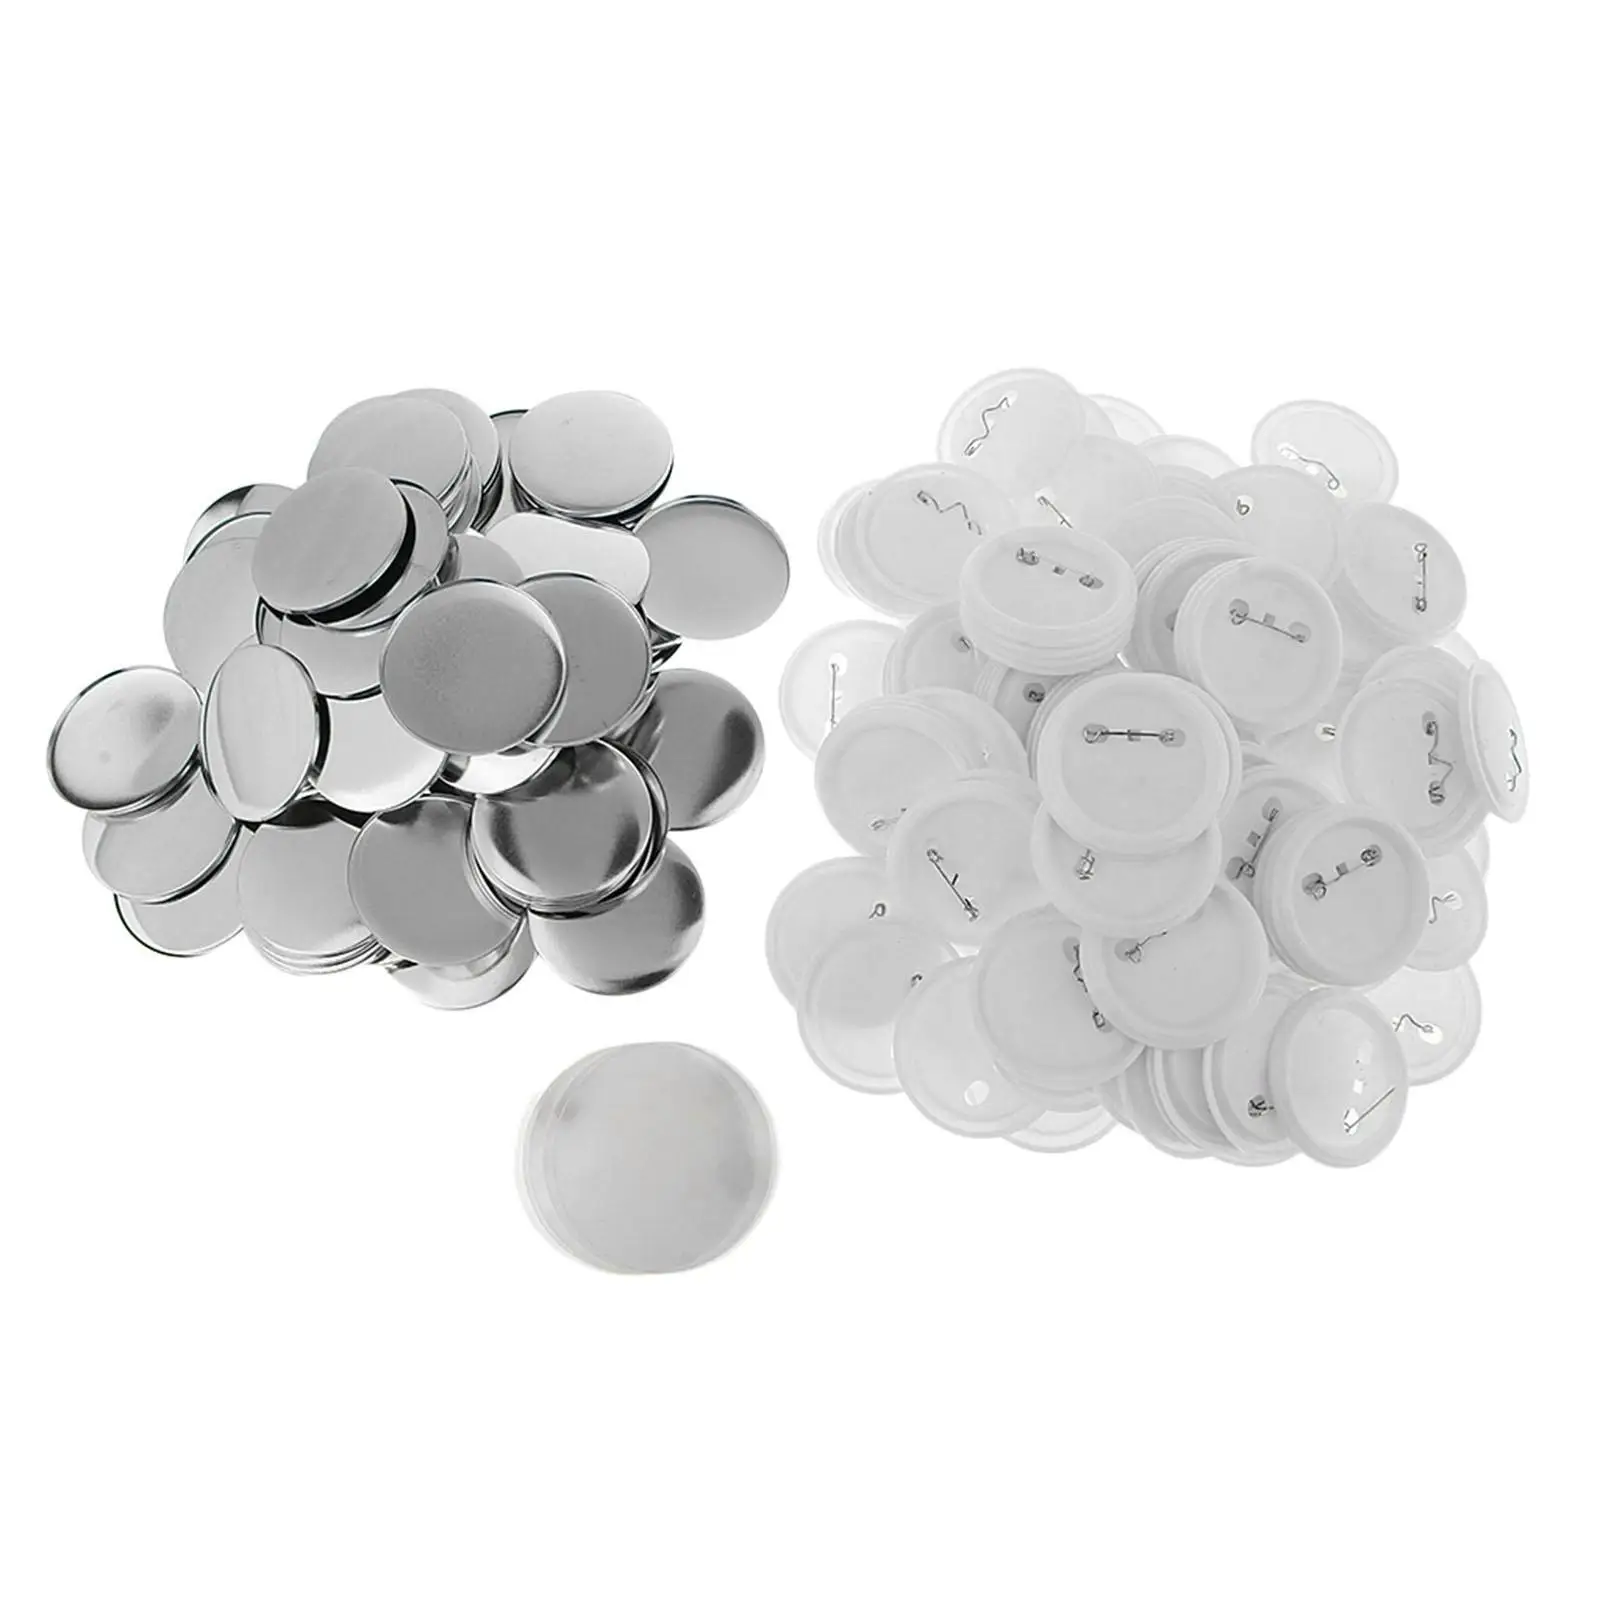 100 Sets Blank Button Making Supplies 50mm Round Badge Pin Button Parts for Button Maker Machine with Metal Cover, Base, Film